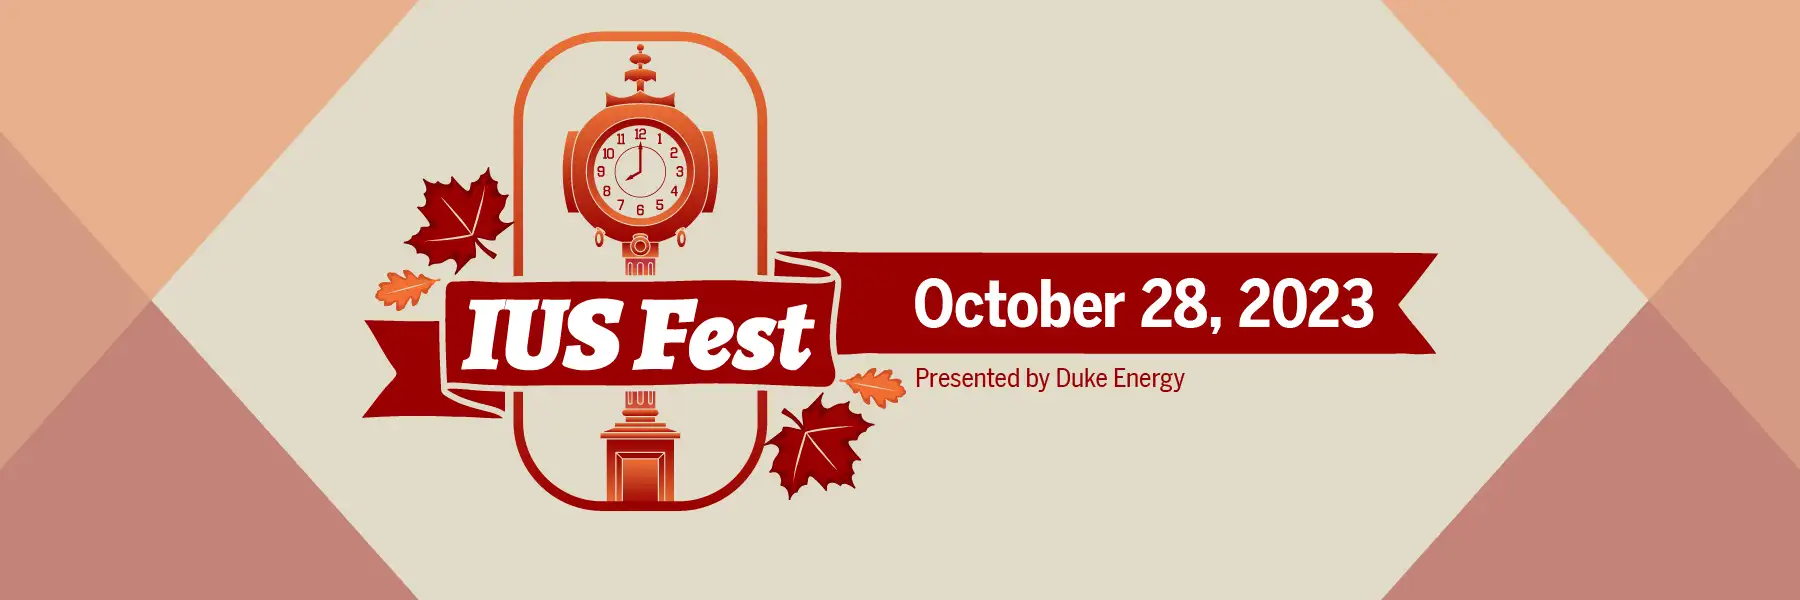 Illustration of the IU Southeast clock tower surrounded by fall leaves and colors with the words IUS Fest October 28, 2023